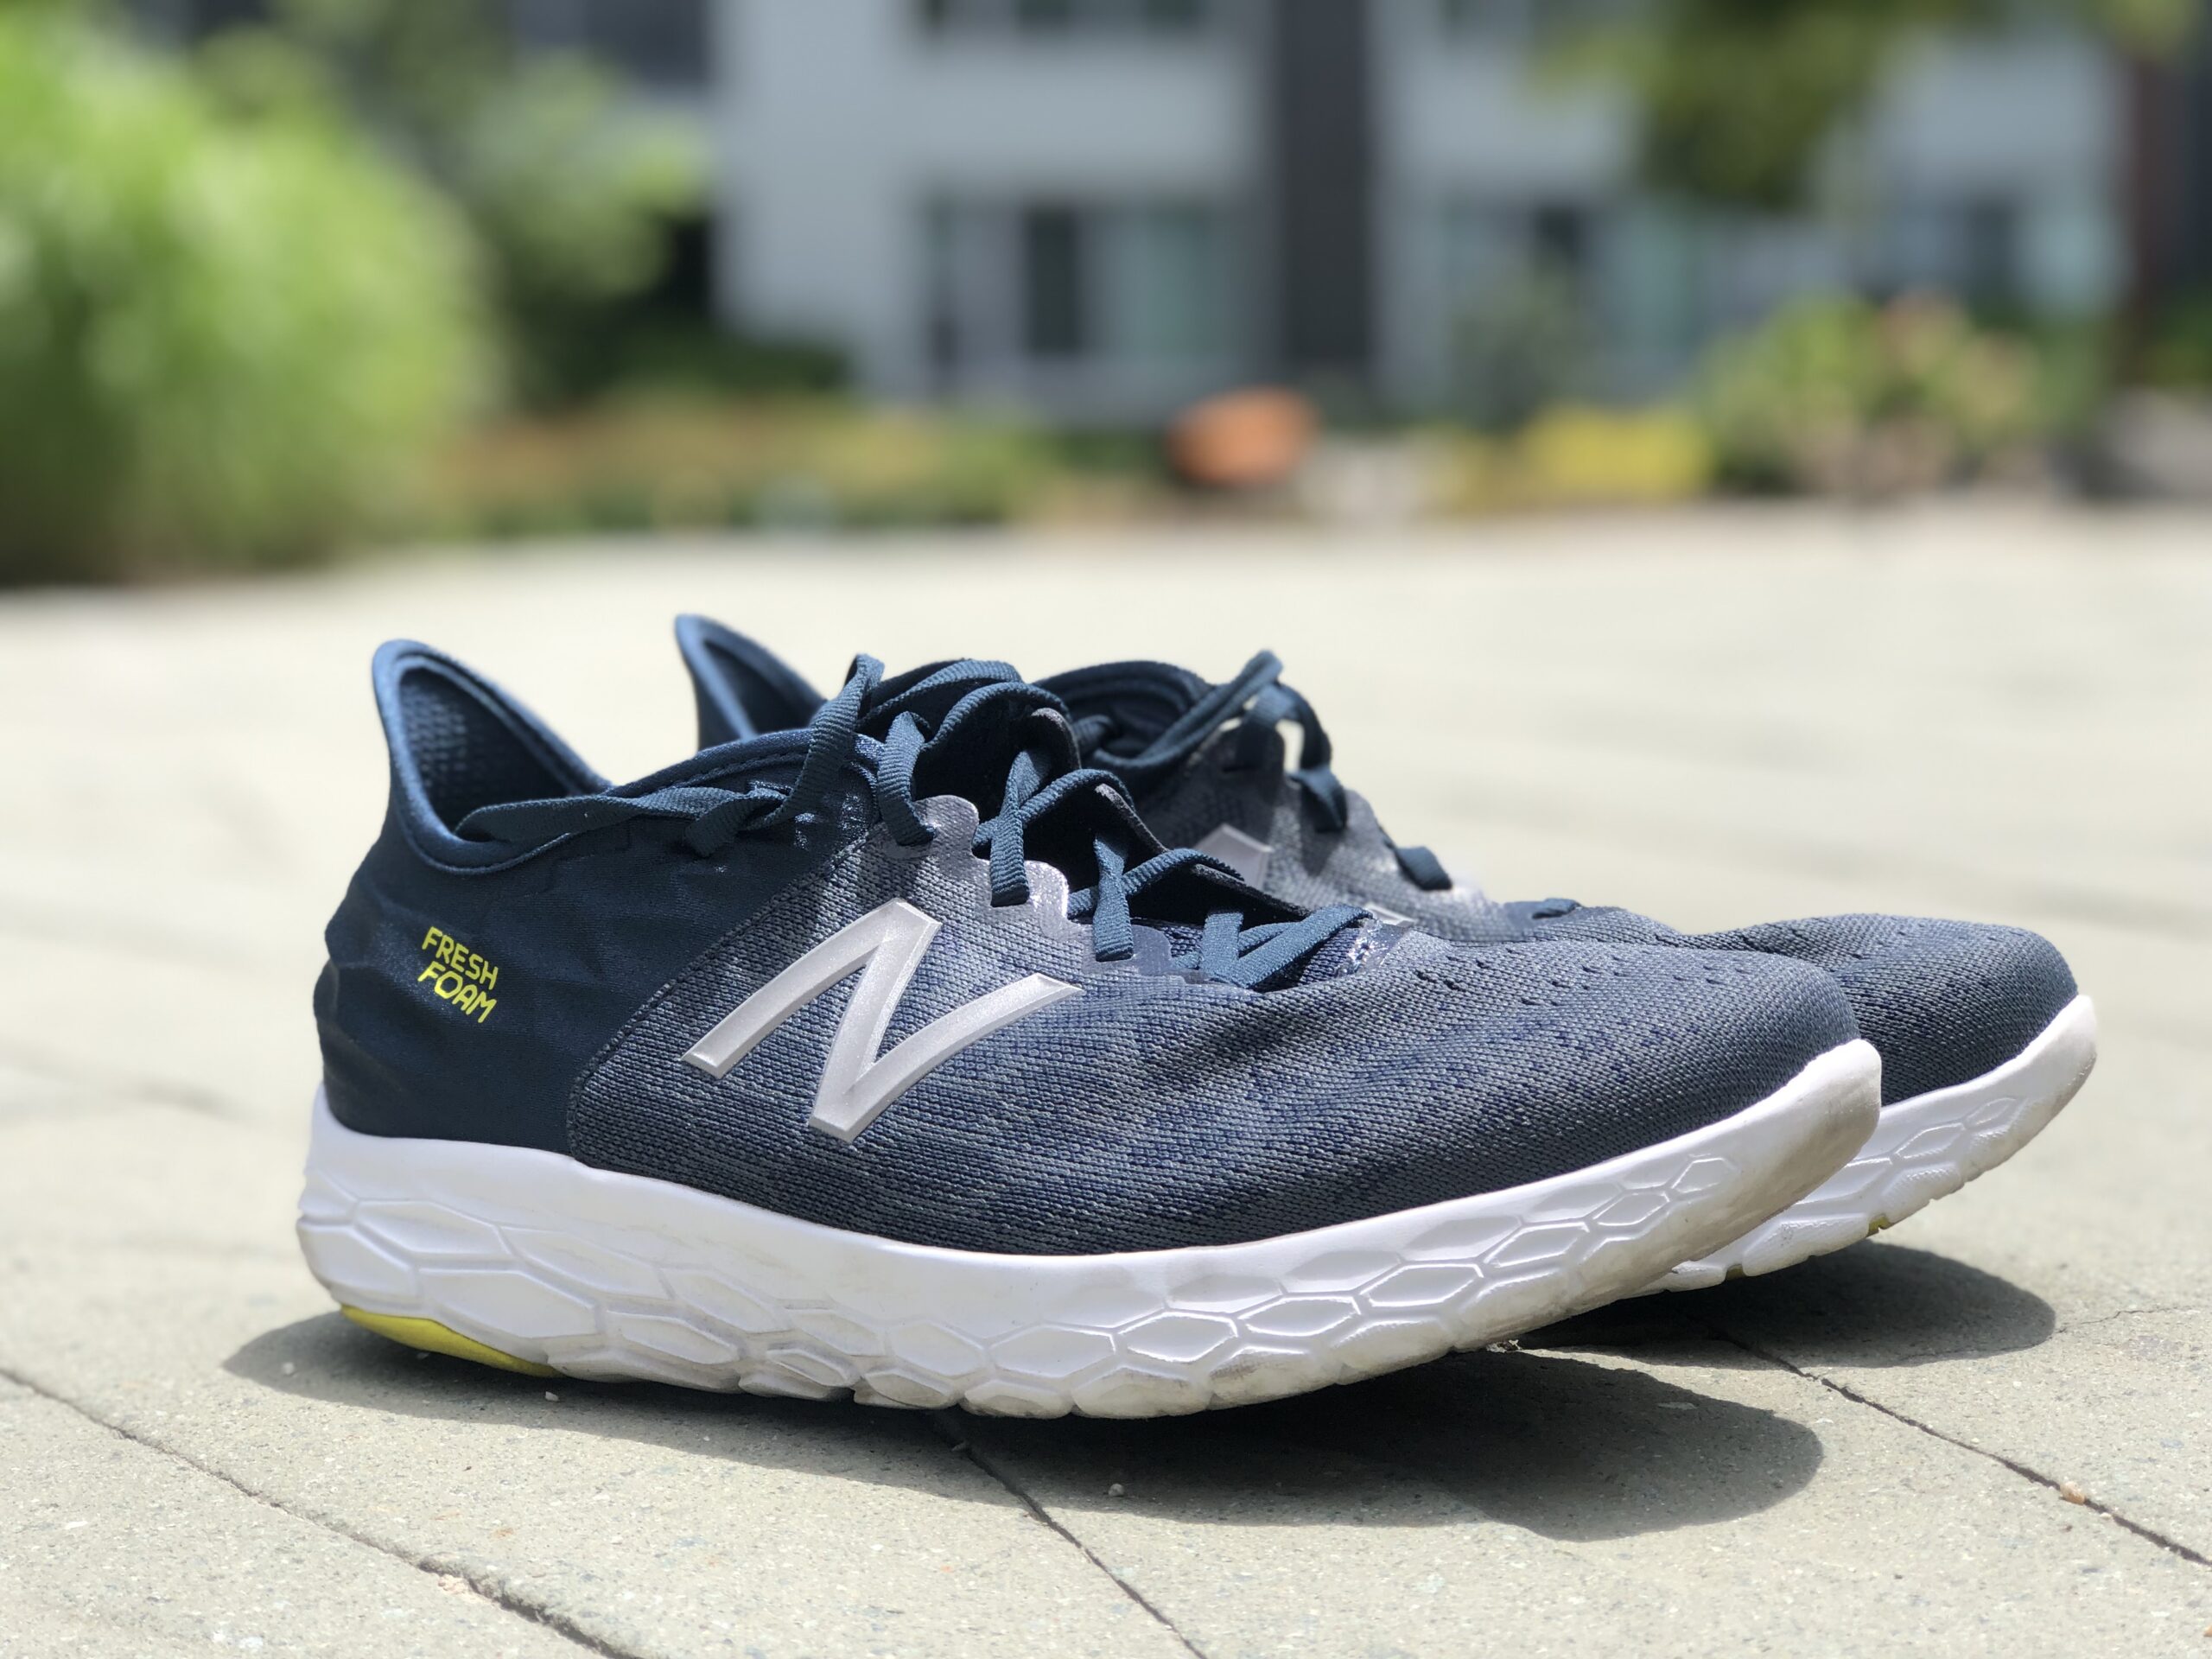 New Balance Beacon 2 Performance Review - Believe in the Run